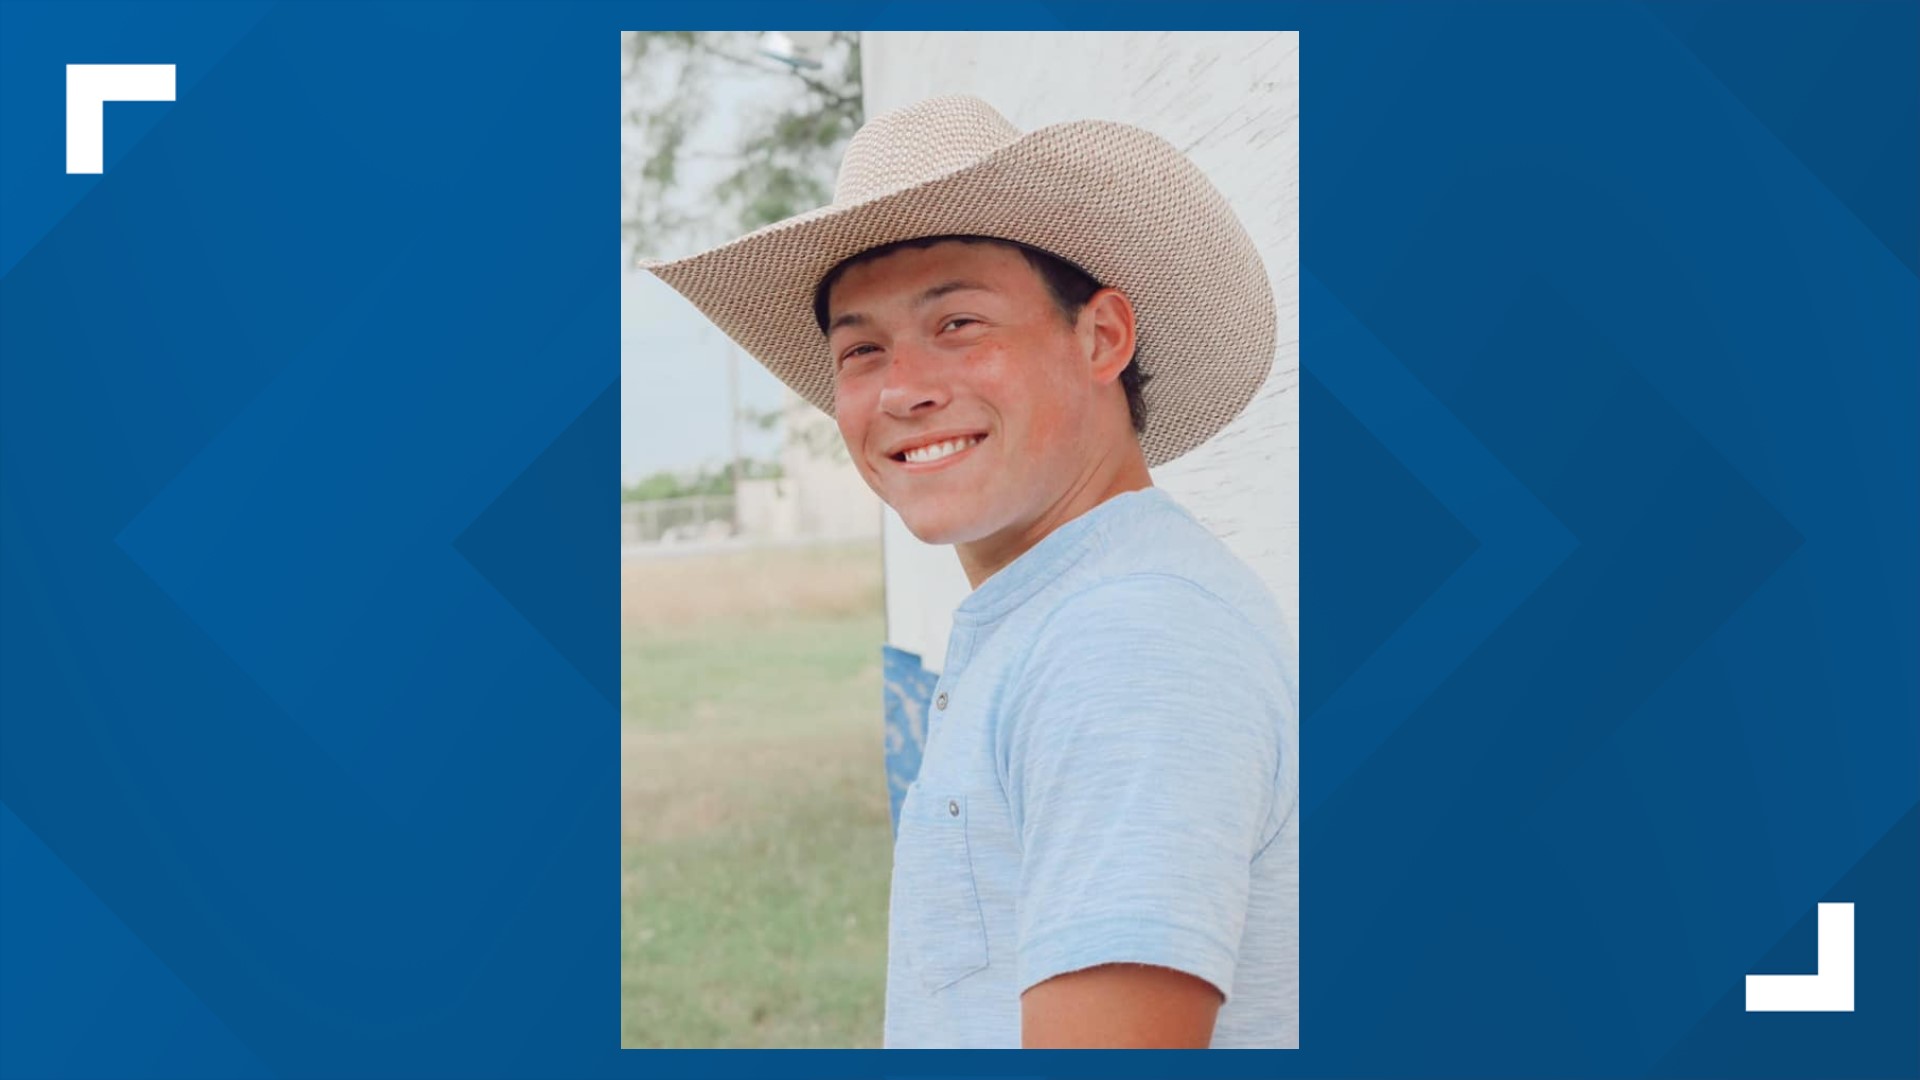 Peter "Chase" Bishop, 19, died Friday after his family said he had an accident while practicing bull riding.